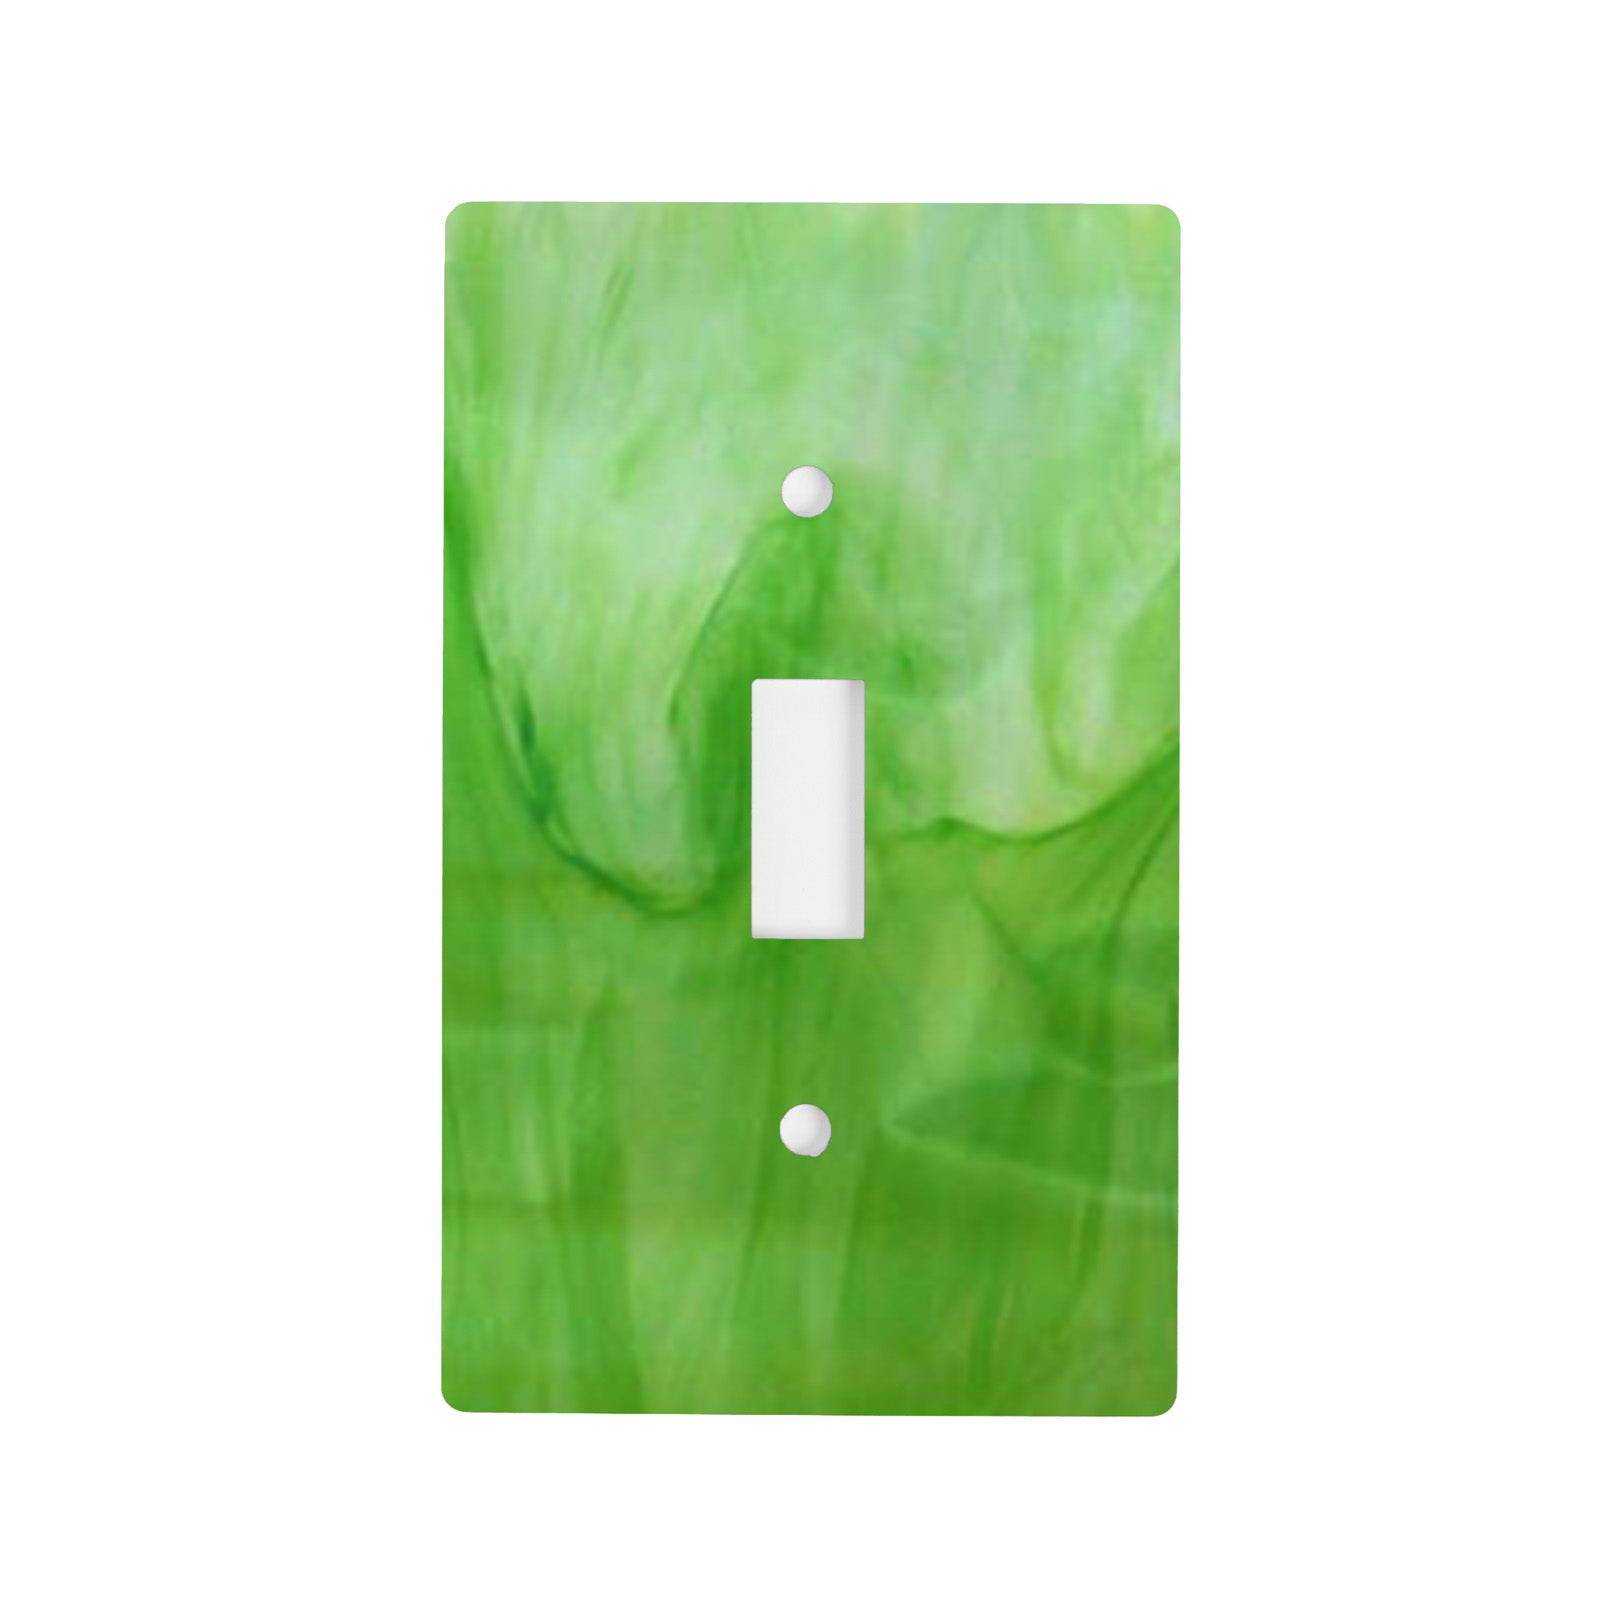 Standard Light Switch Cover